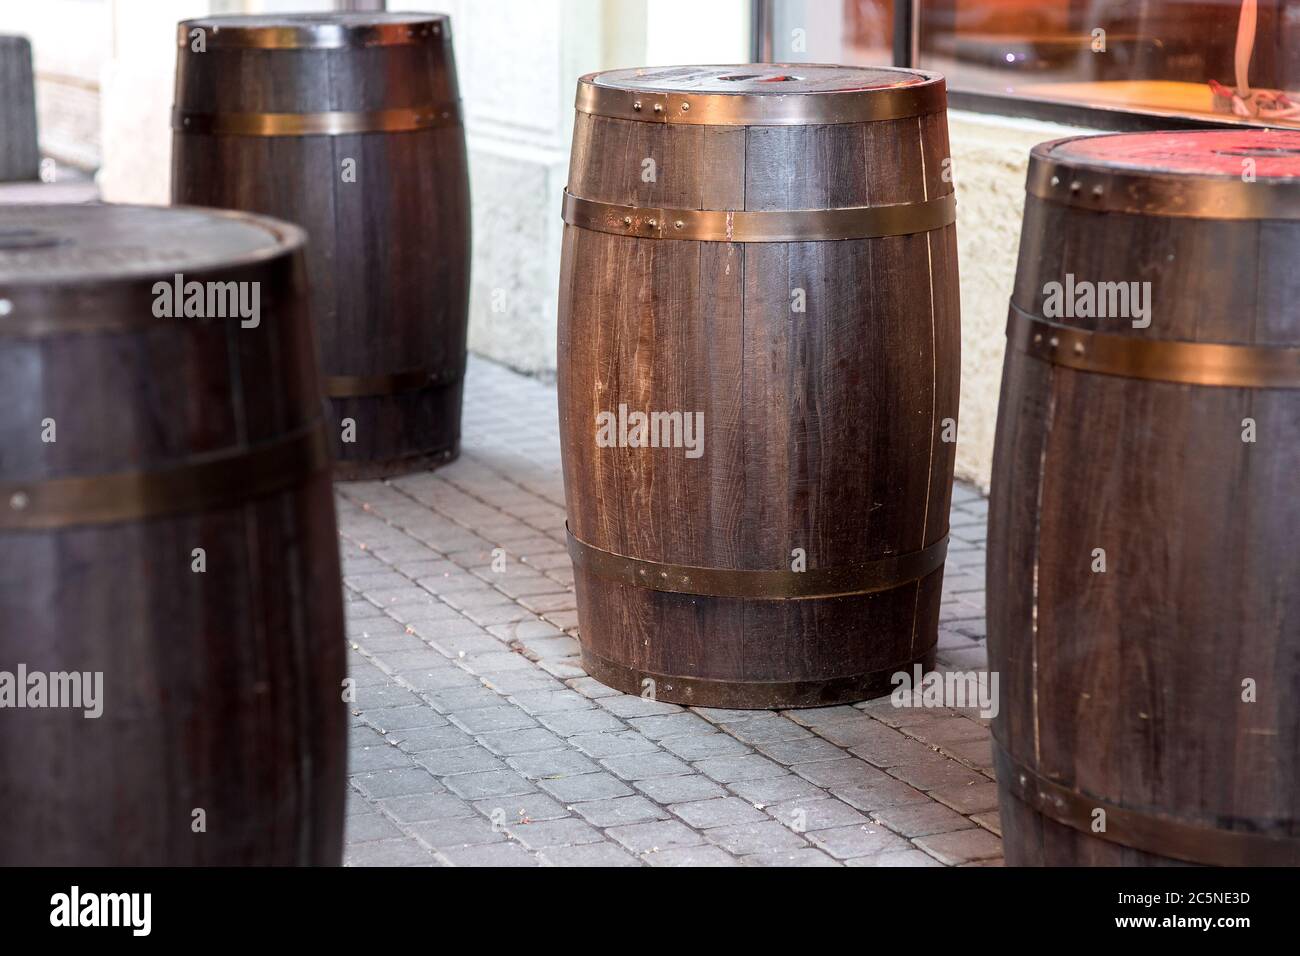 brown wooden rum barrel on the street on stone paving slabs, bar restaurant decorations close up nobody. Stock Photo